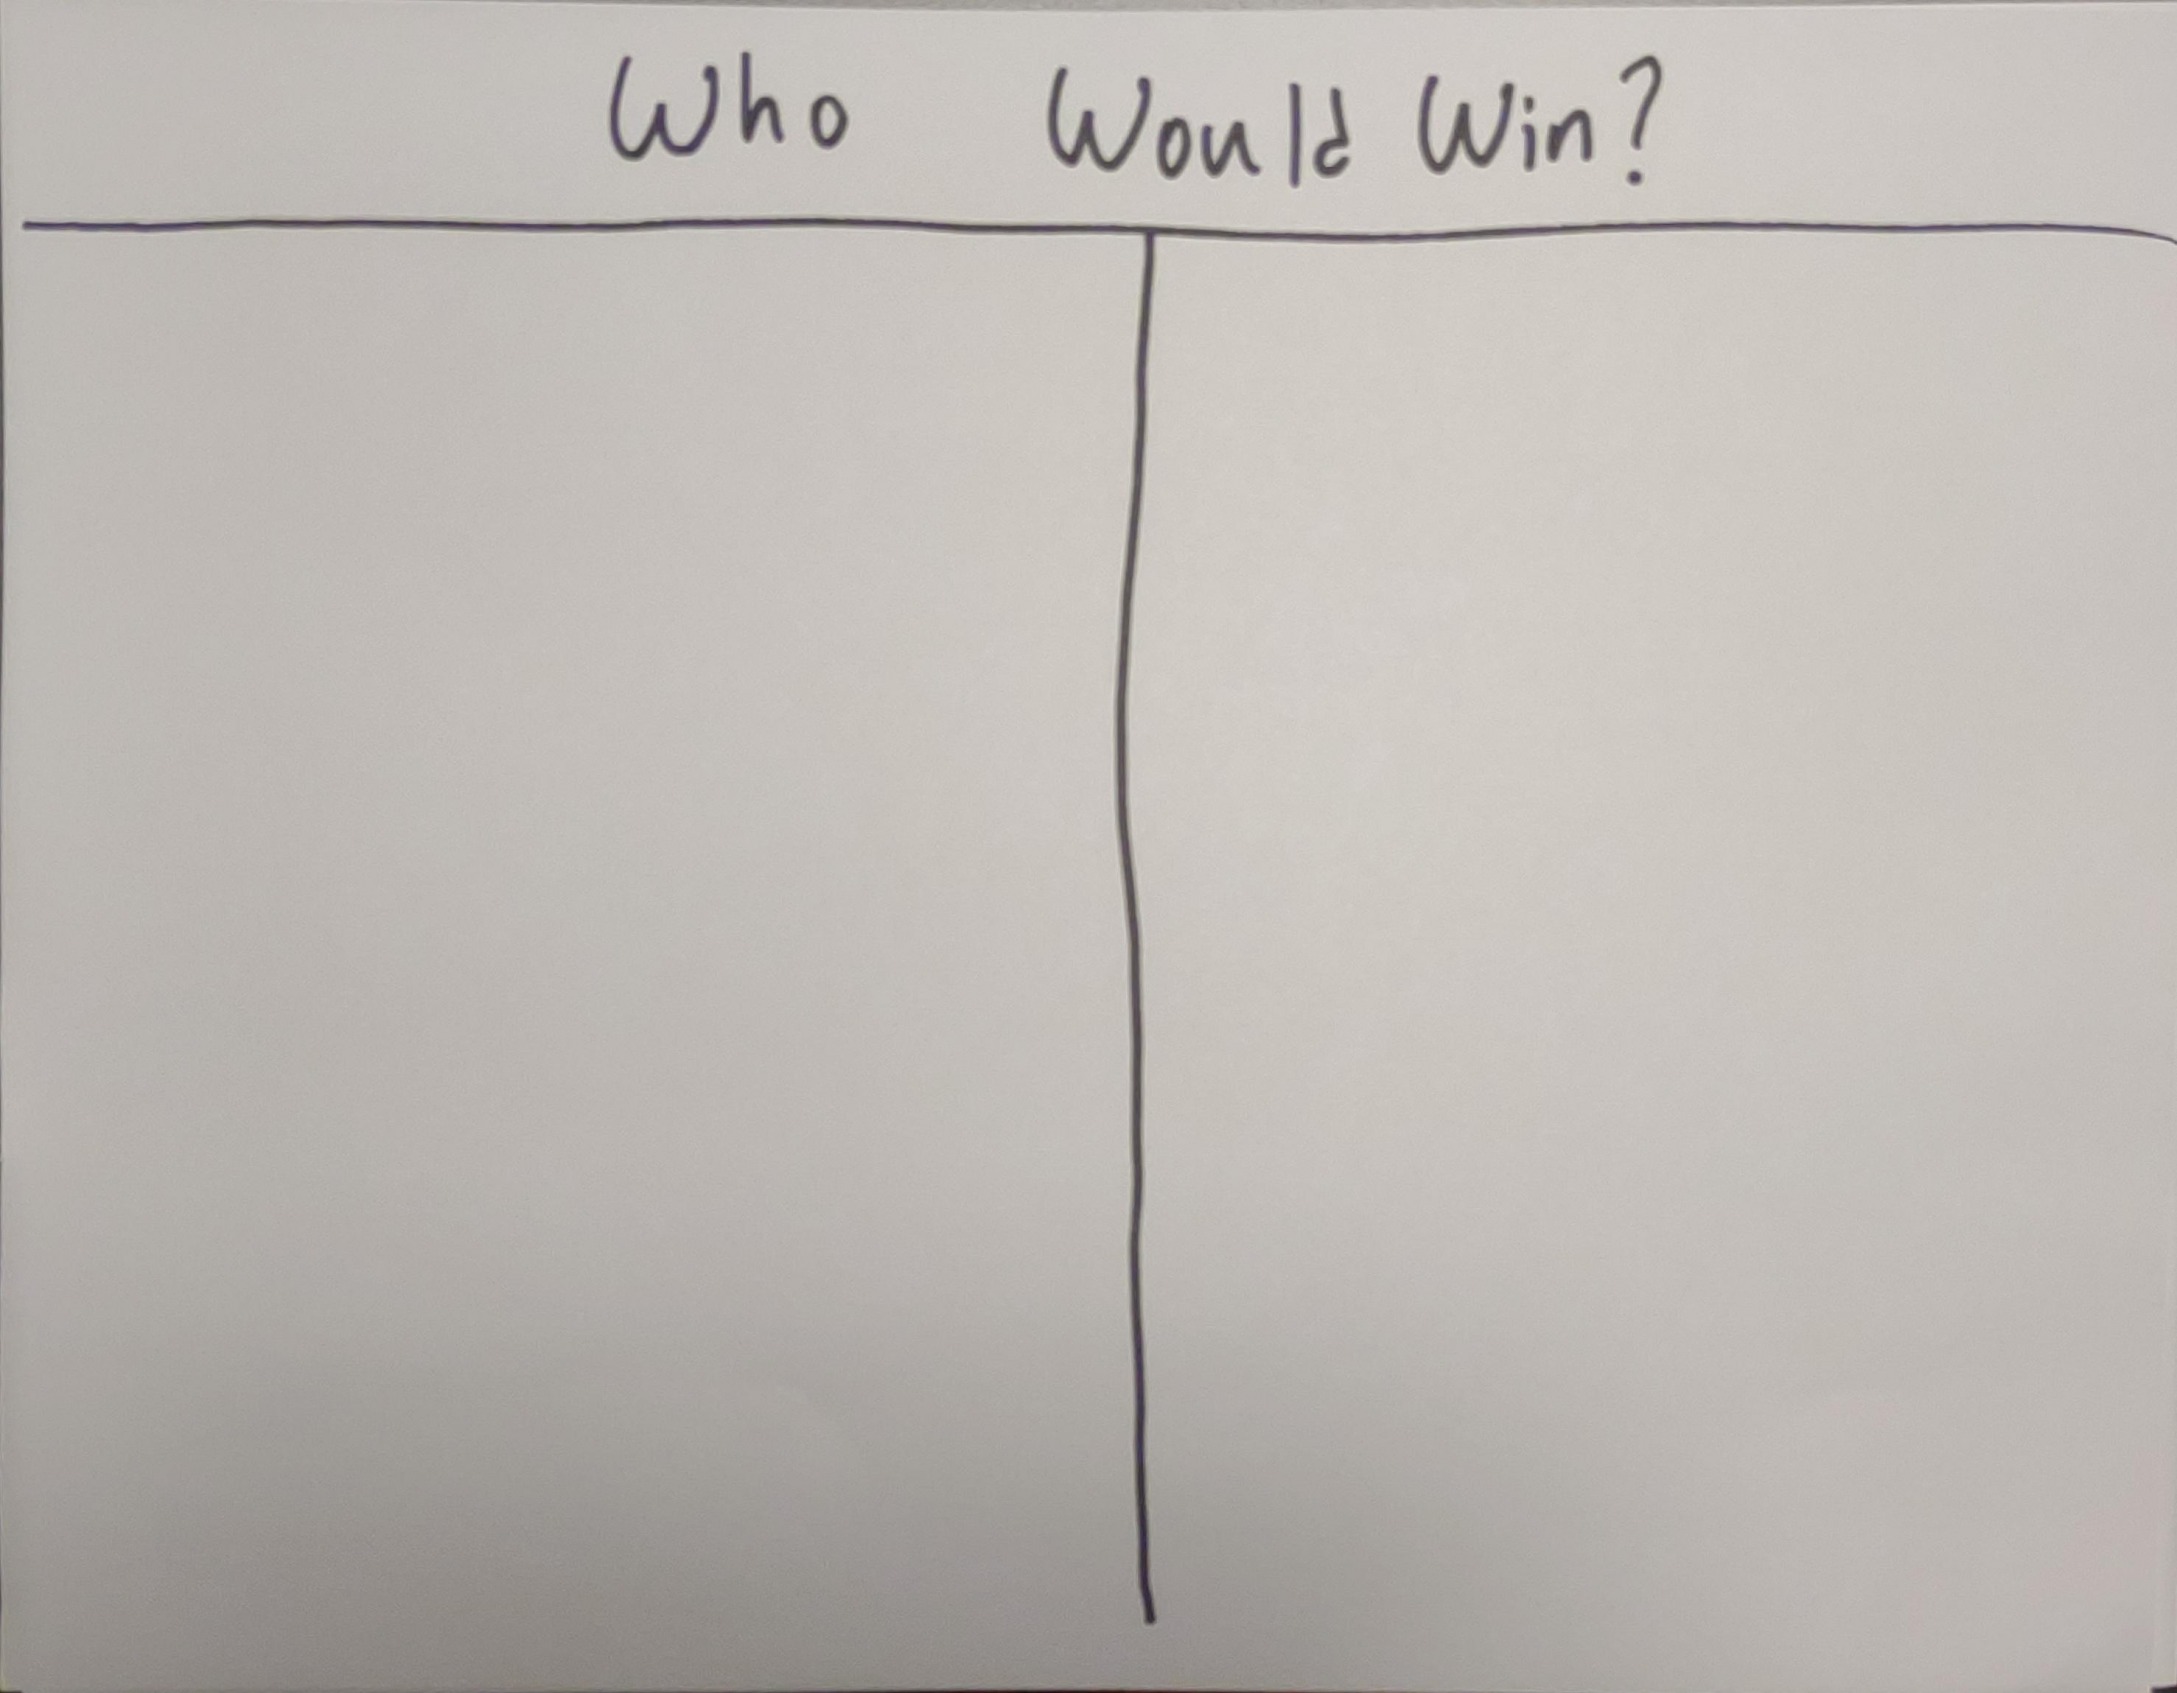 Who would win? Blank Meme Template